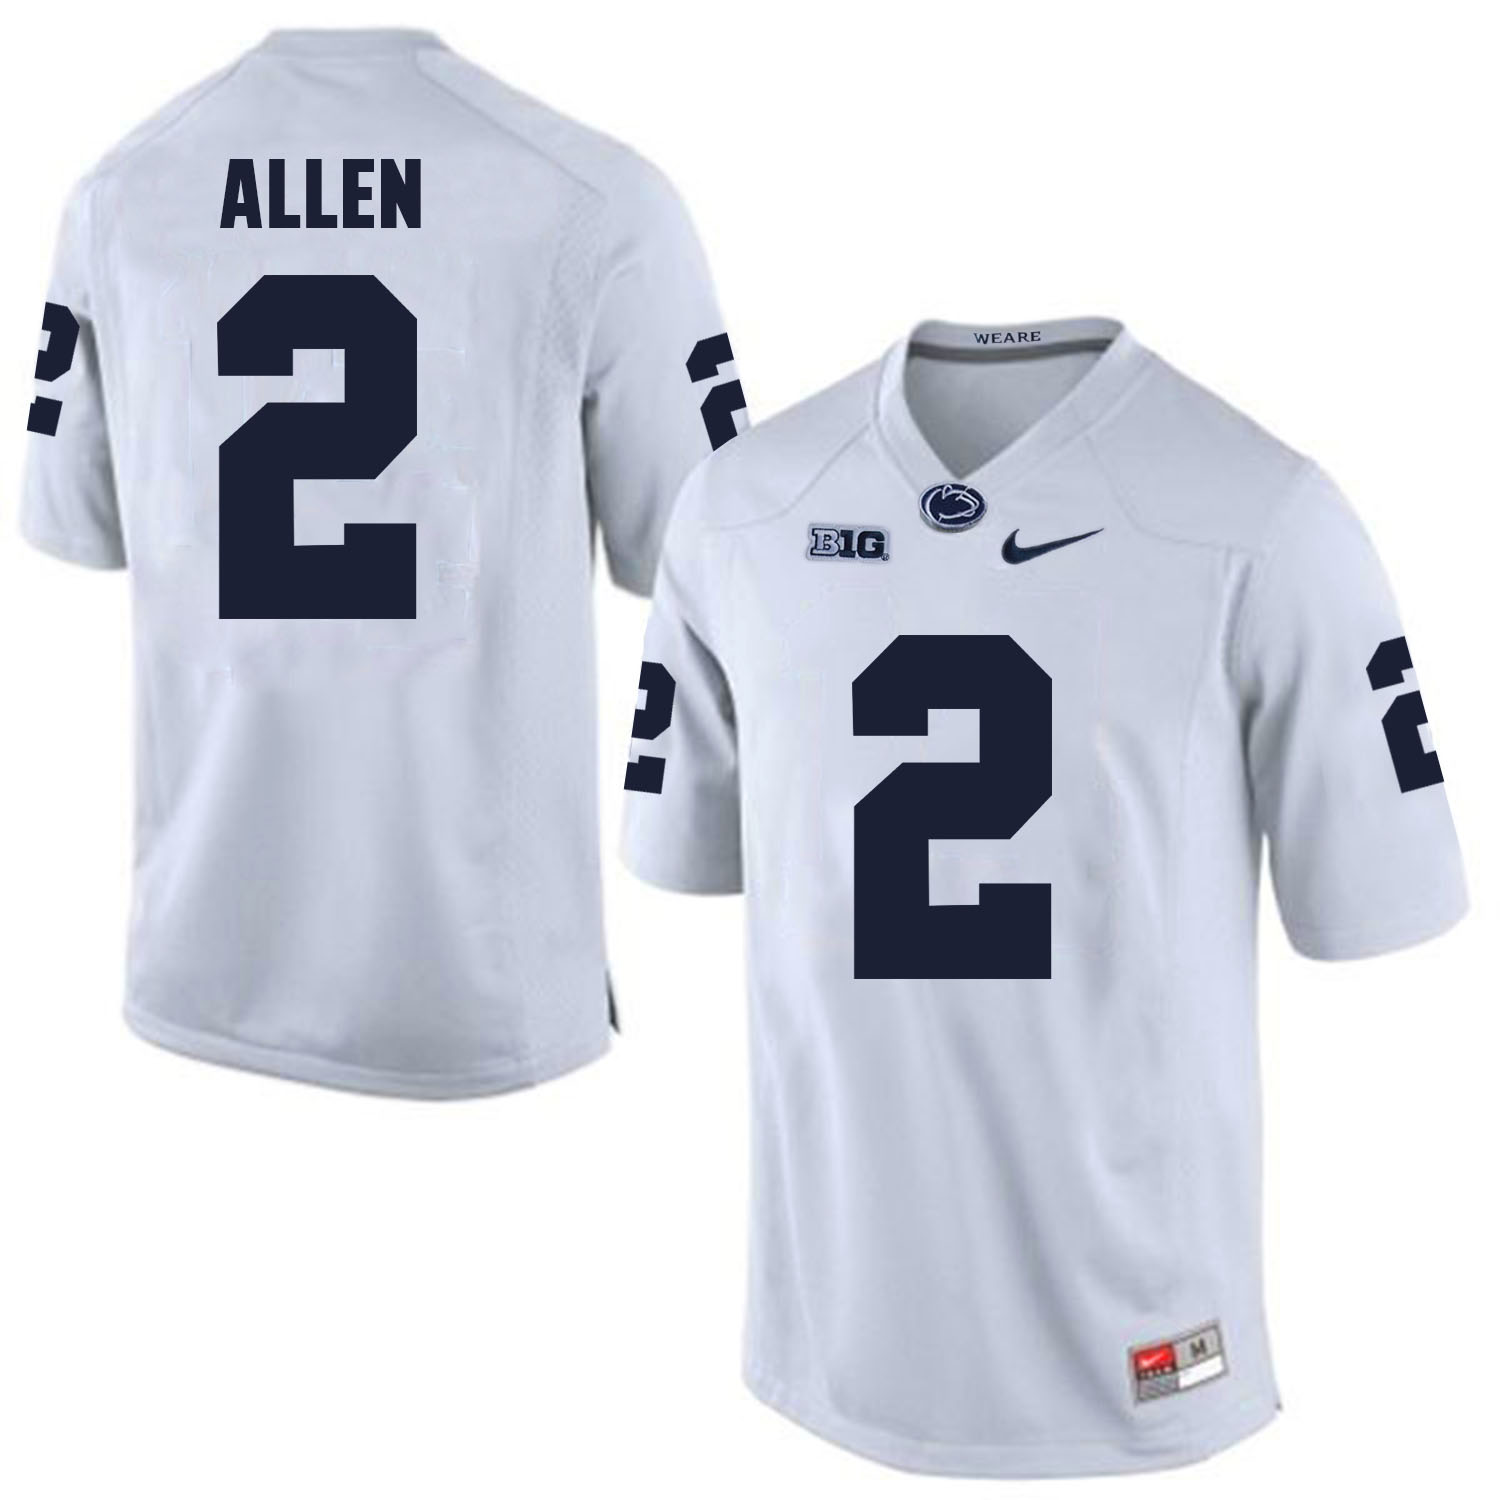 Penn State Nittany Lions 2 Marcus Allen White College Football Jersey